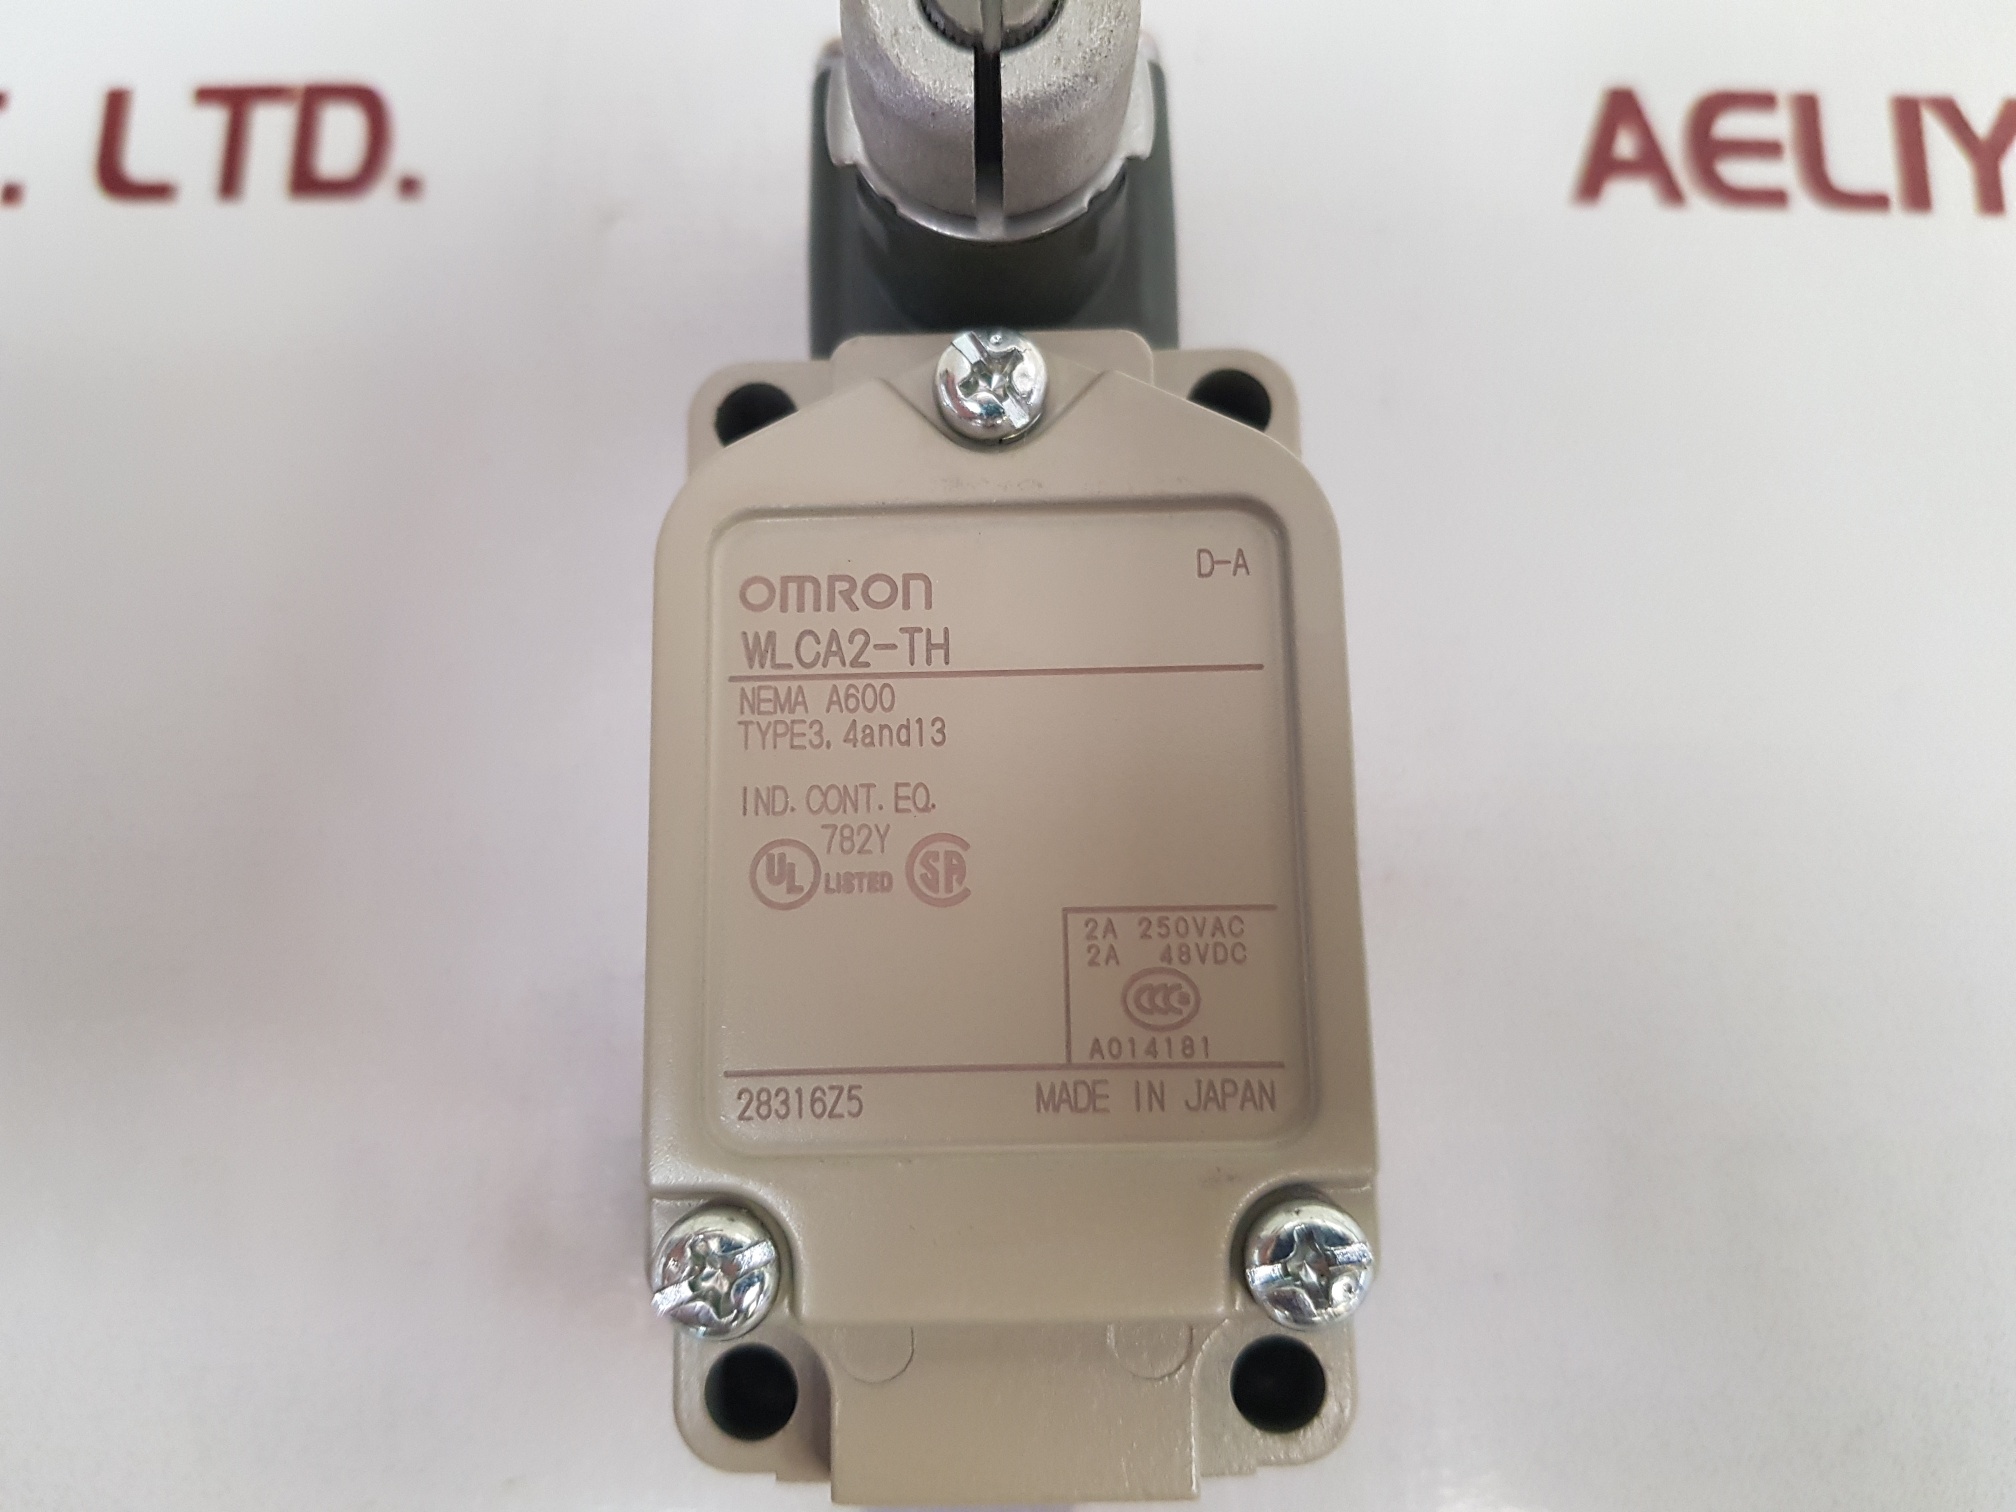 OMRON WLCA2-TH TWO- CIRCUIT LIMIT SWITCH